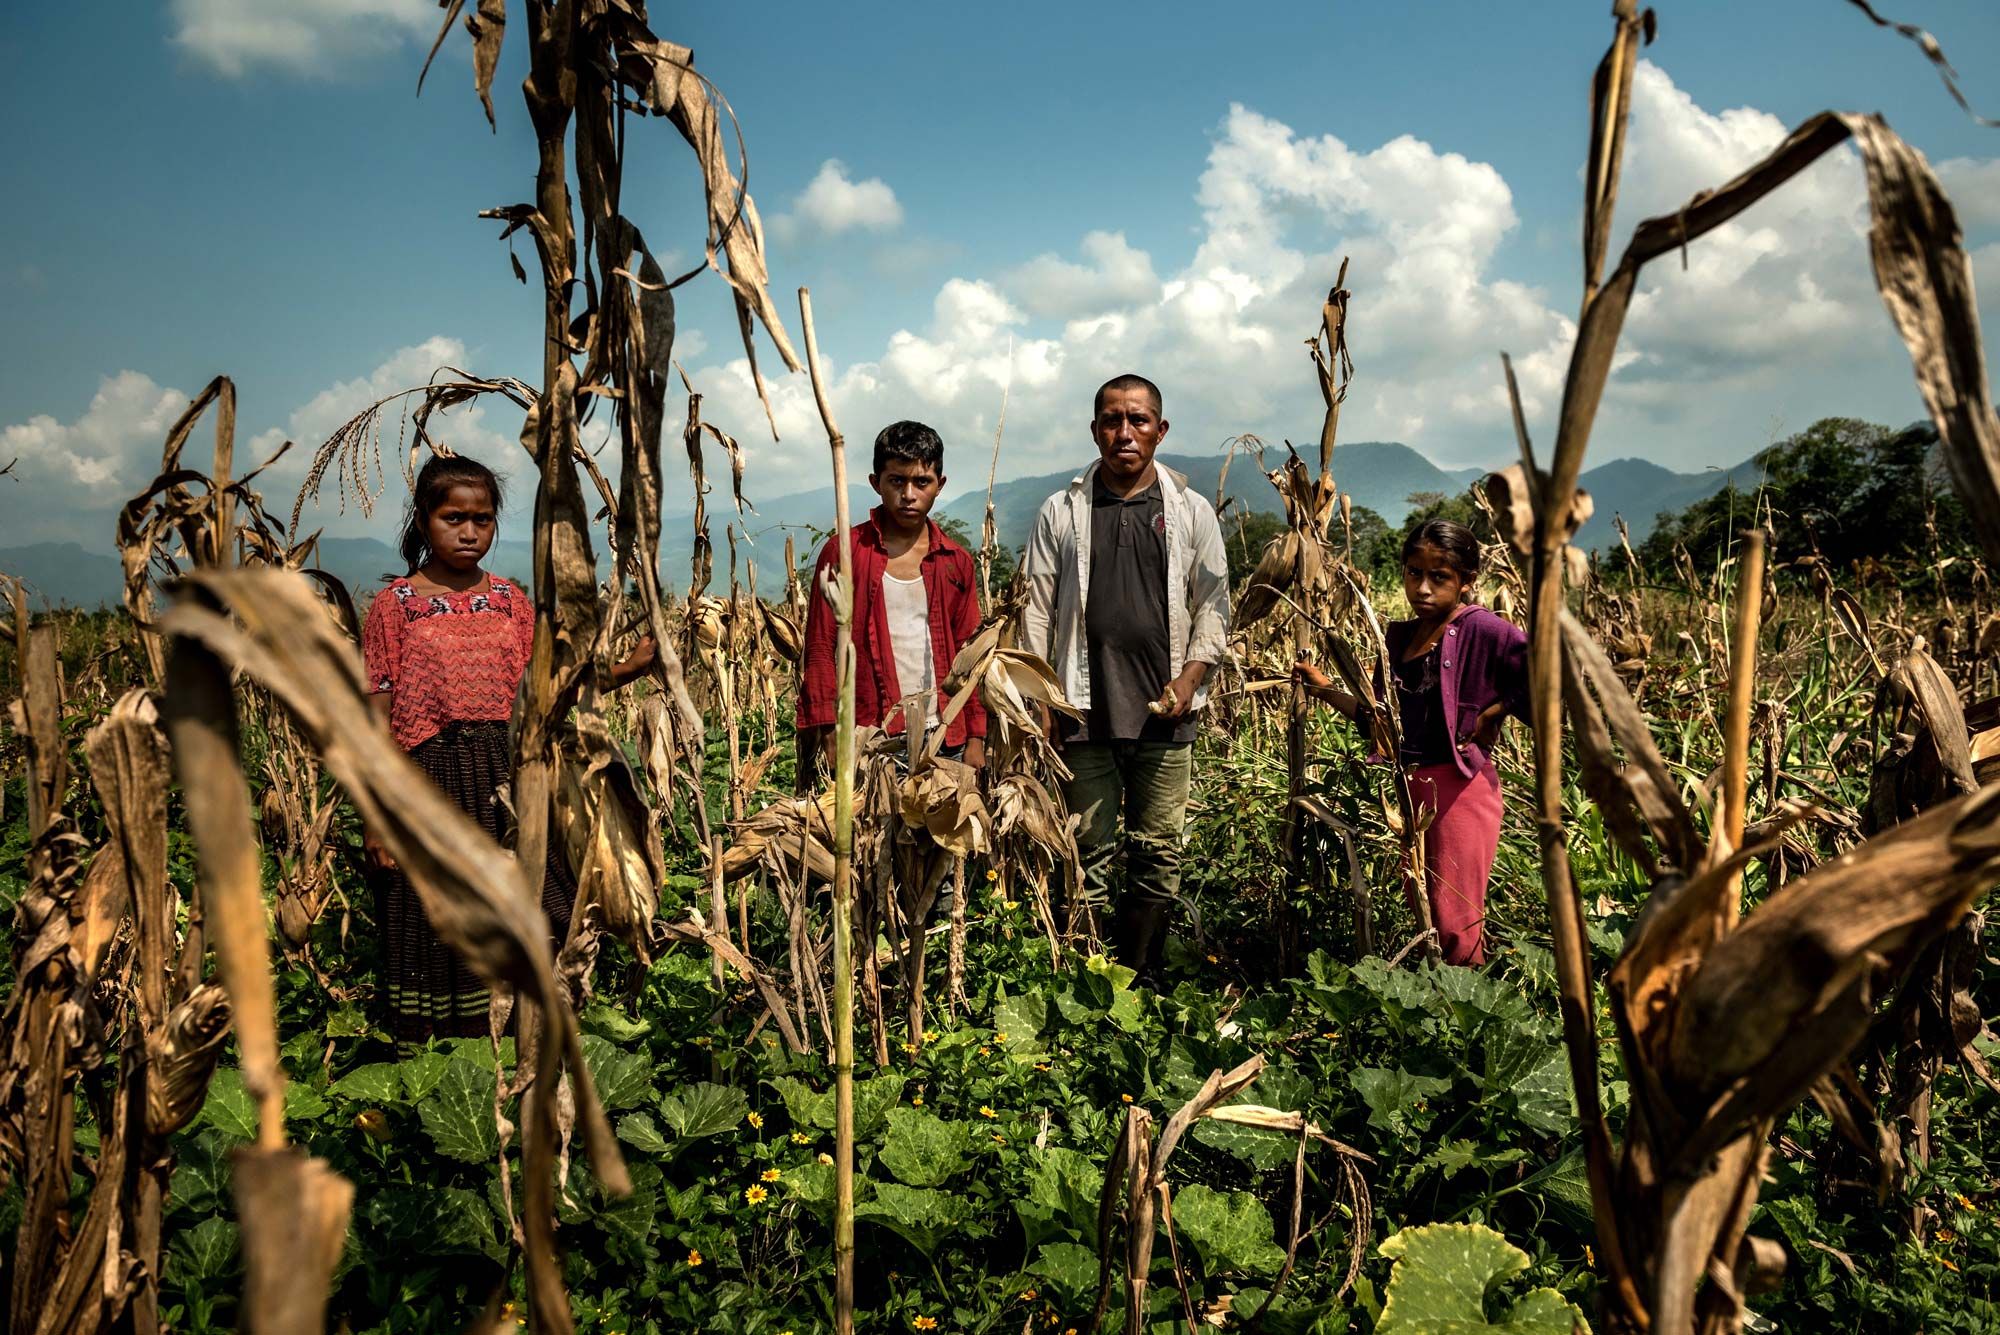 ALTA VERAPAZ, GUATEMALA. Carlos Tiul, an Indigenous farmer whose maize crop has failed, with his children. Image by Meridith Kohut. Guatemala, 2020.